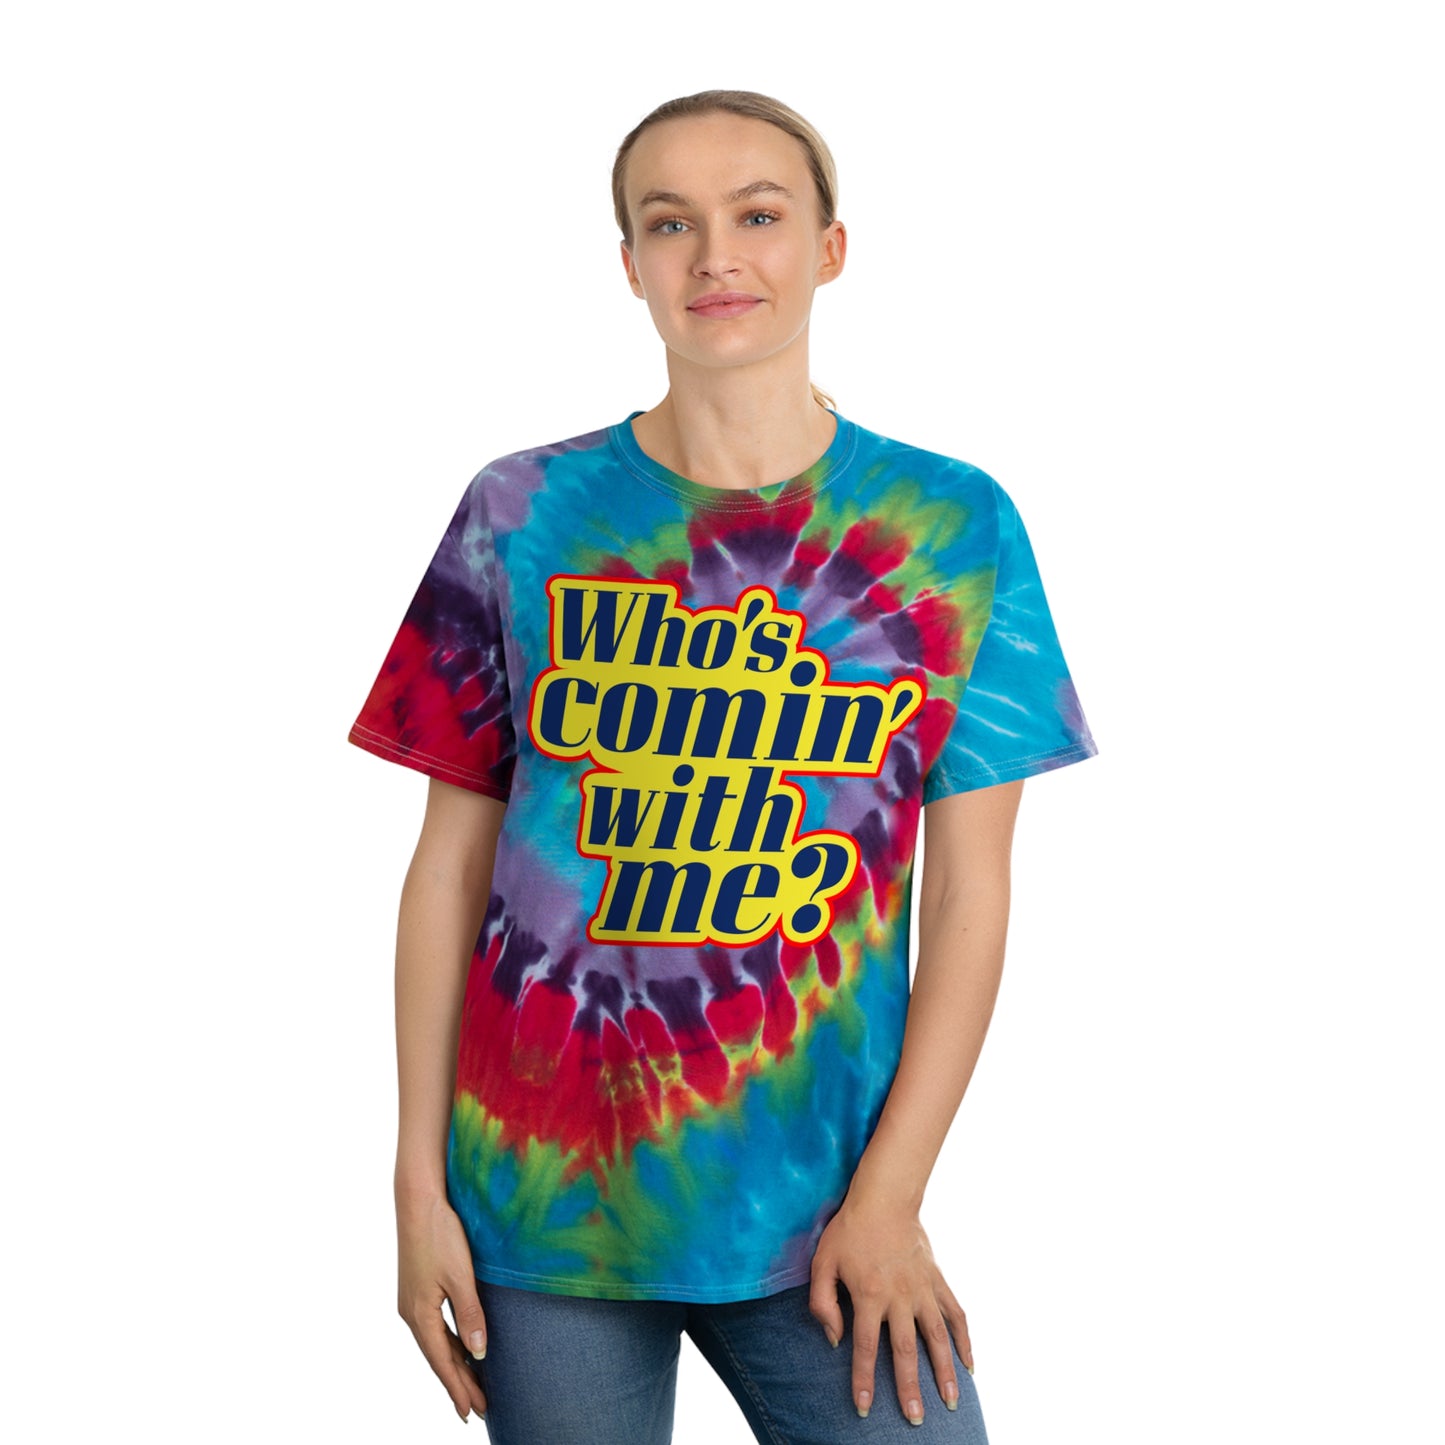 Who's Comin' With me? tie-dye t-shirt